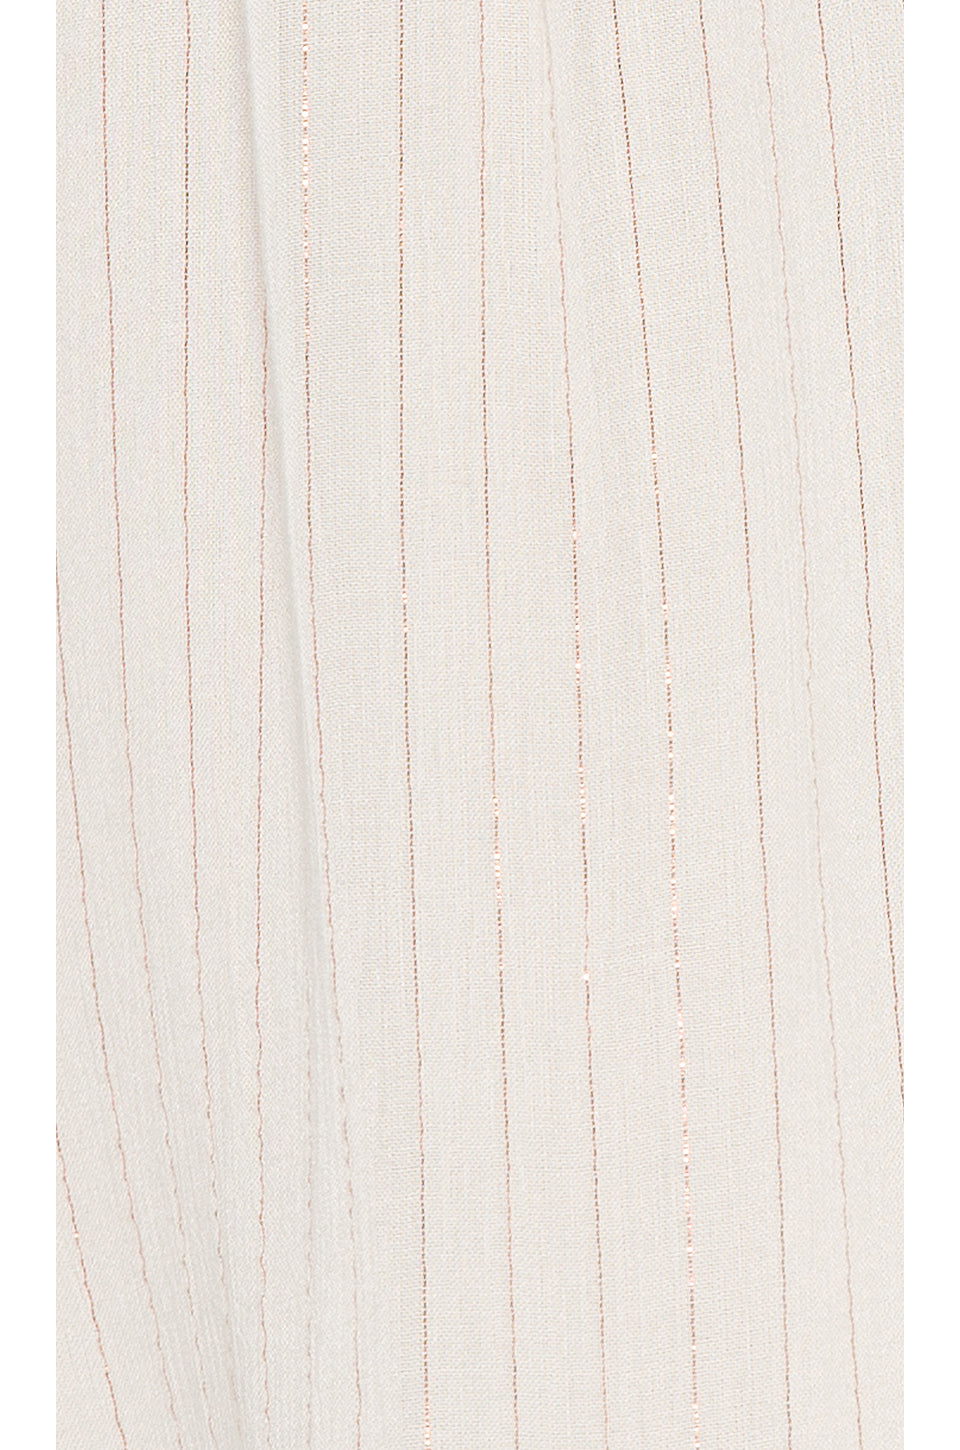 Everly Pant in ROSE GOLD STRIPE